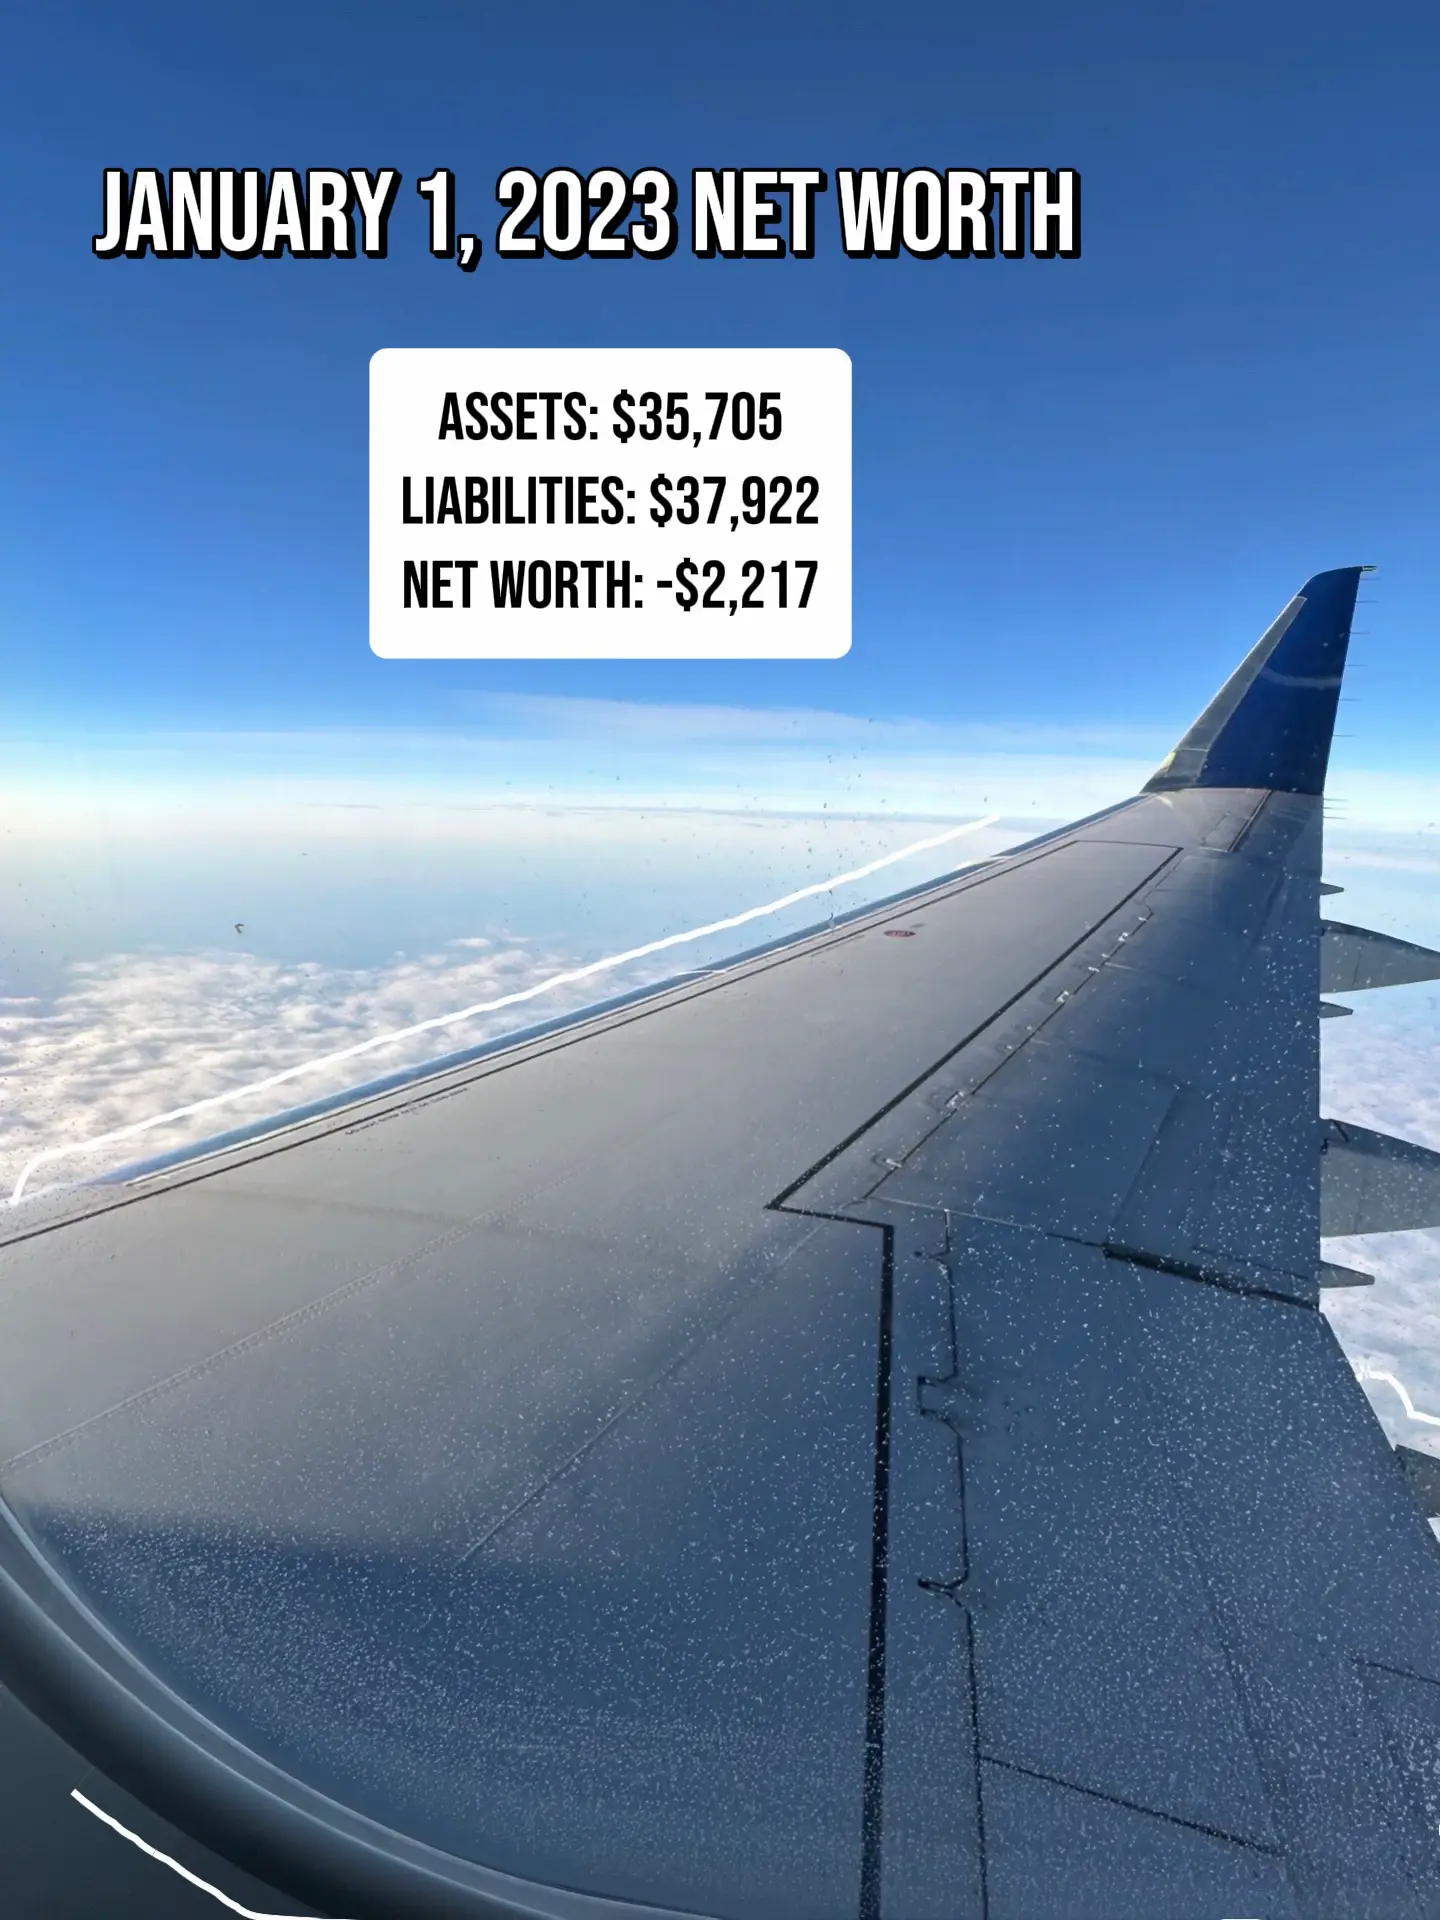  A plane flying in the sky with the words "NET Worth Assets